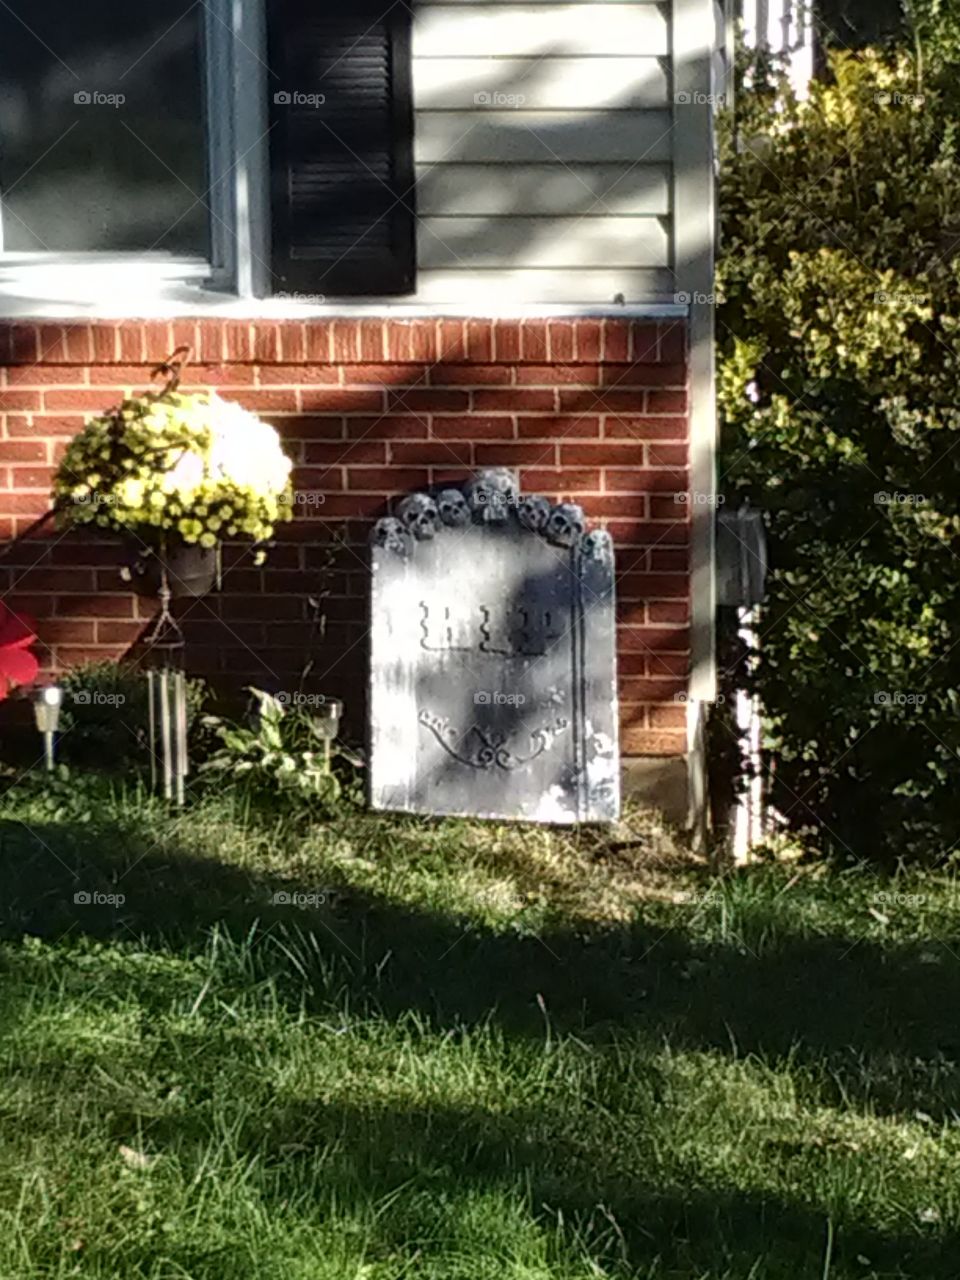 Headstones are popping up everywhere in the City. It may be the end of time this Halloween